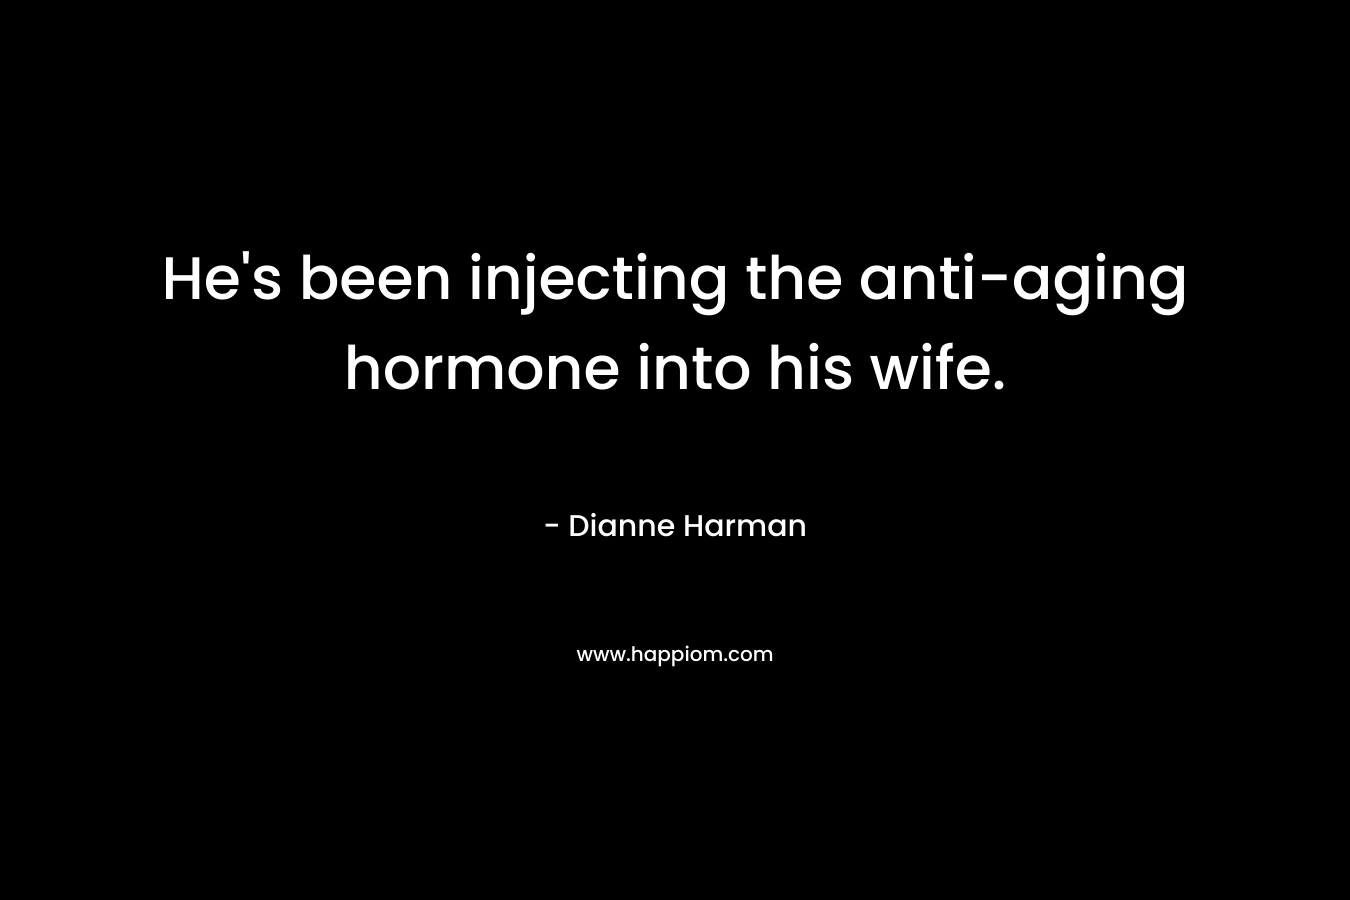 He’s been injecting the anti-aging hormone into his wife. – Dianne Harman